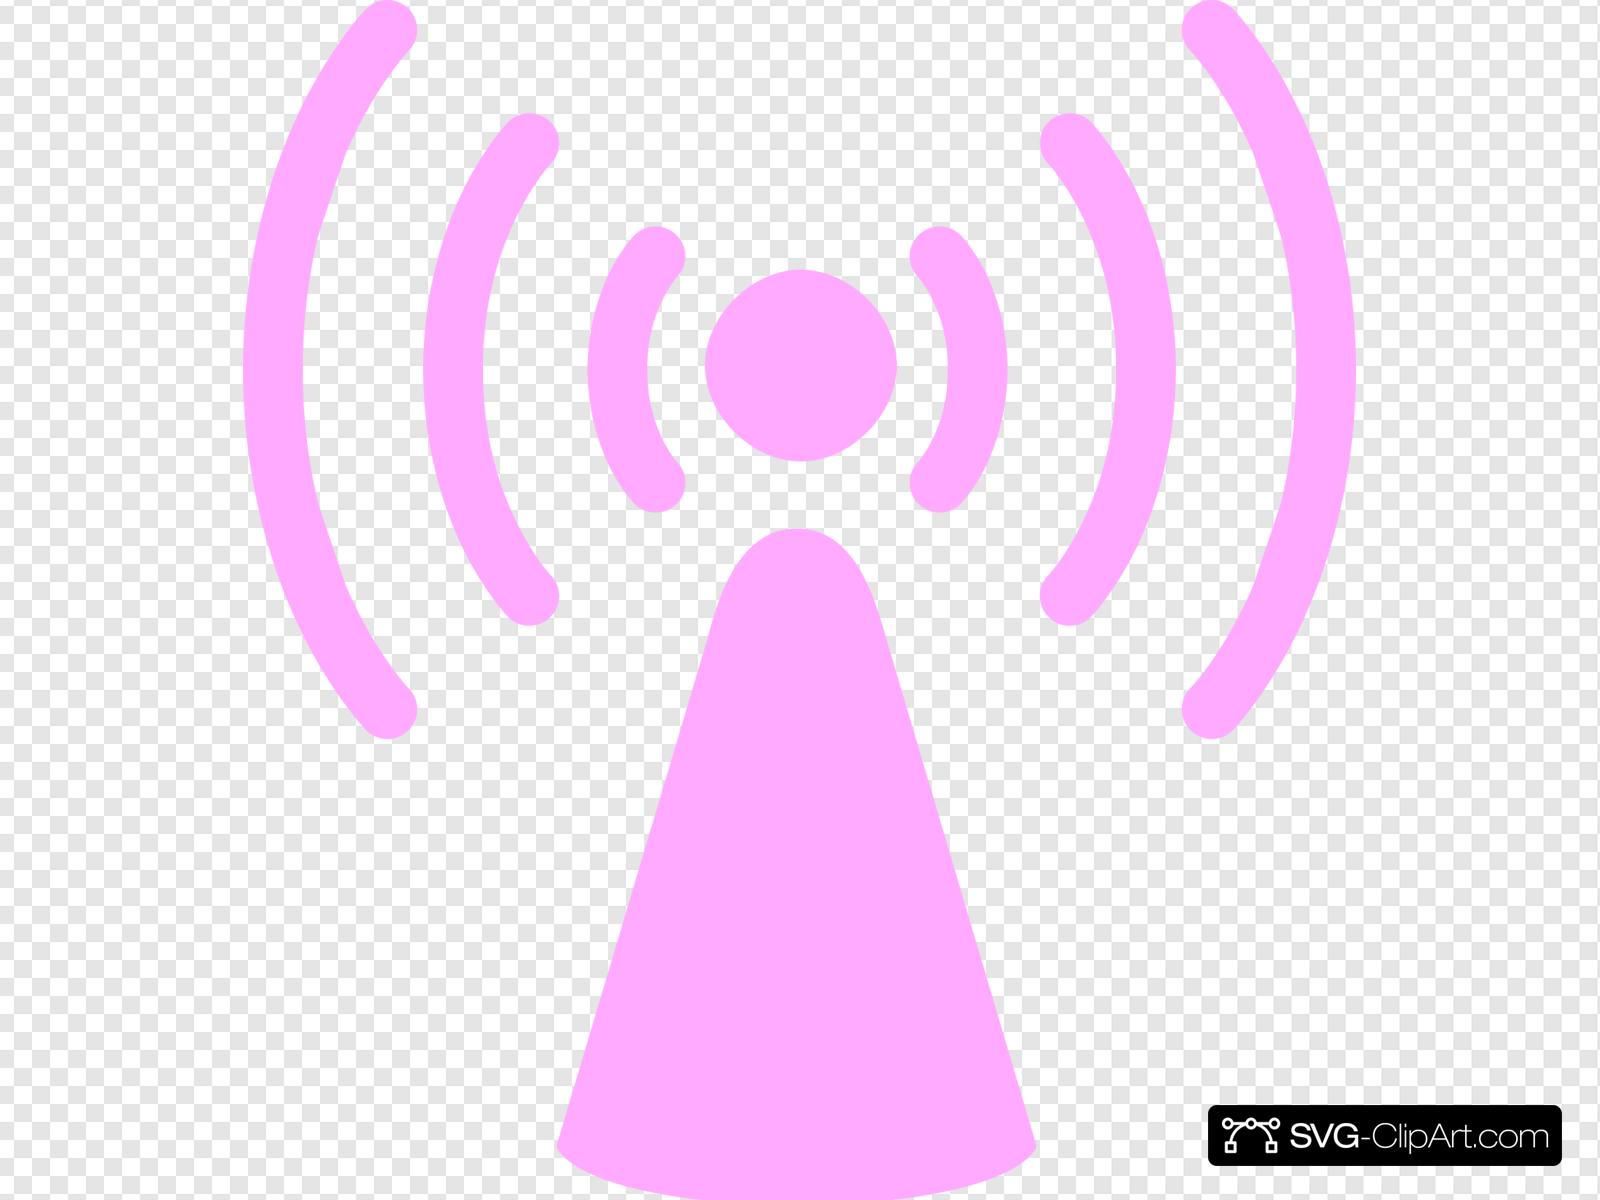 Tower Light Pink Clip art, Icon and SVG